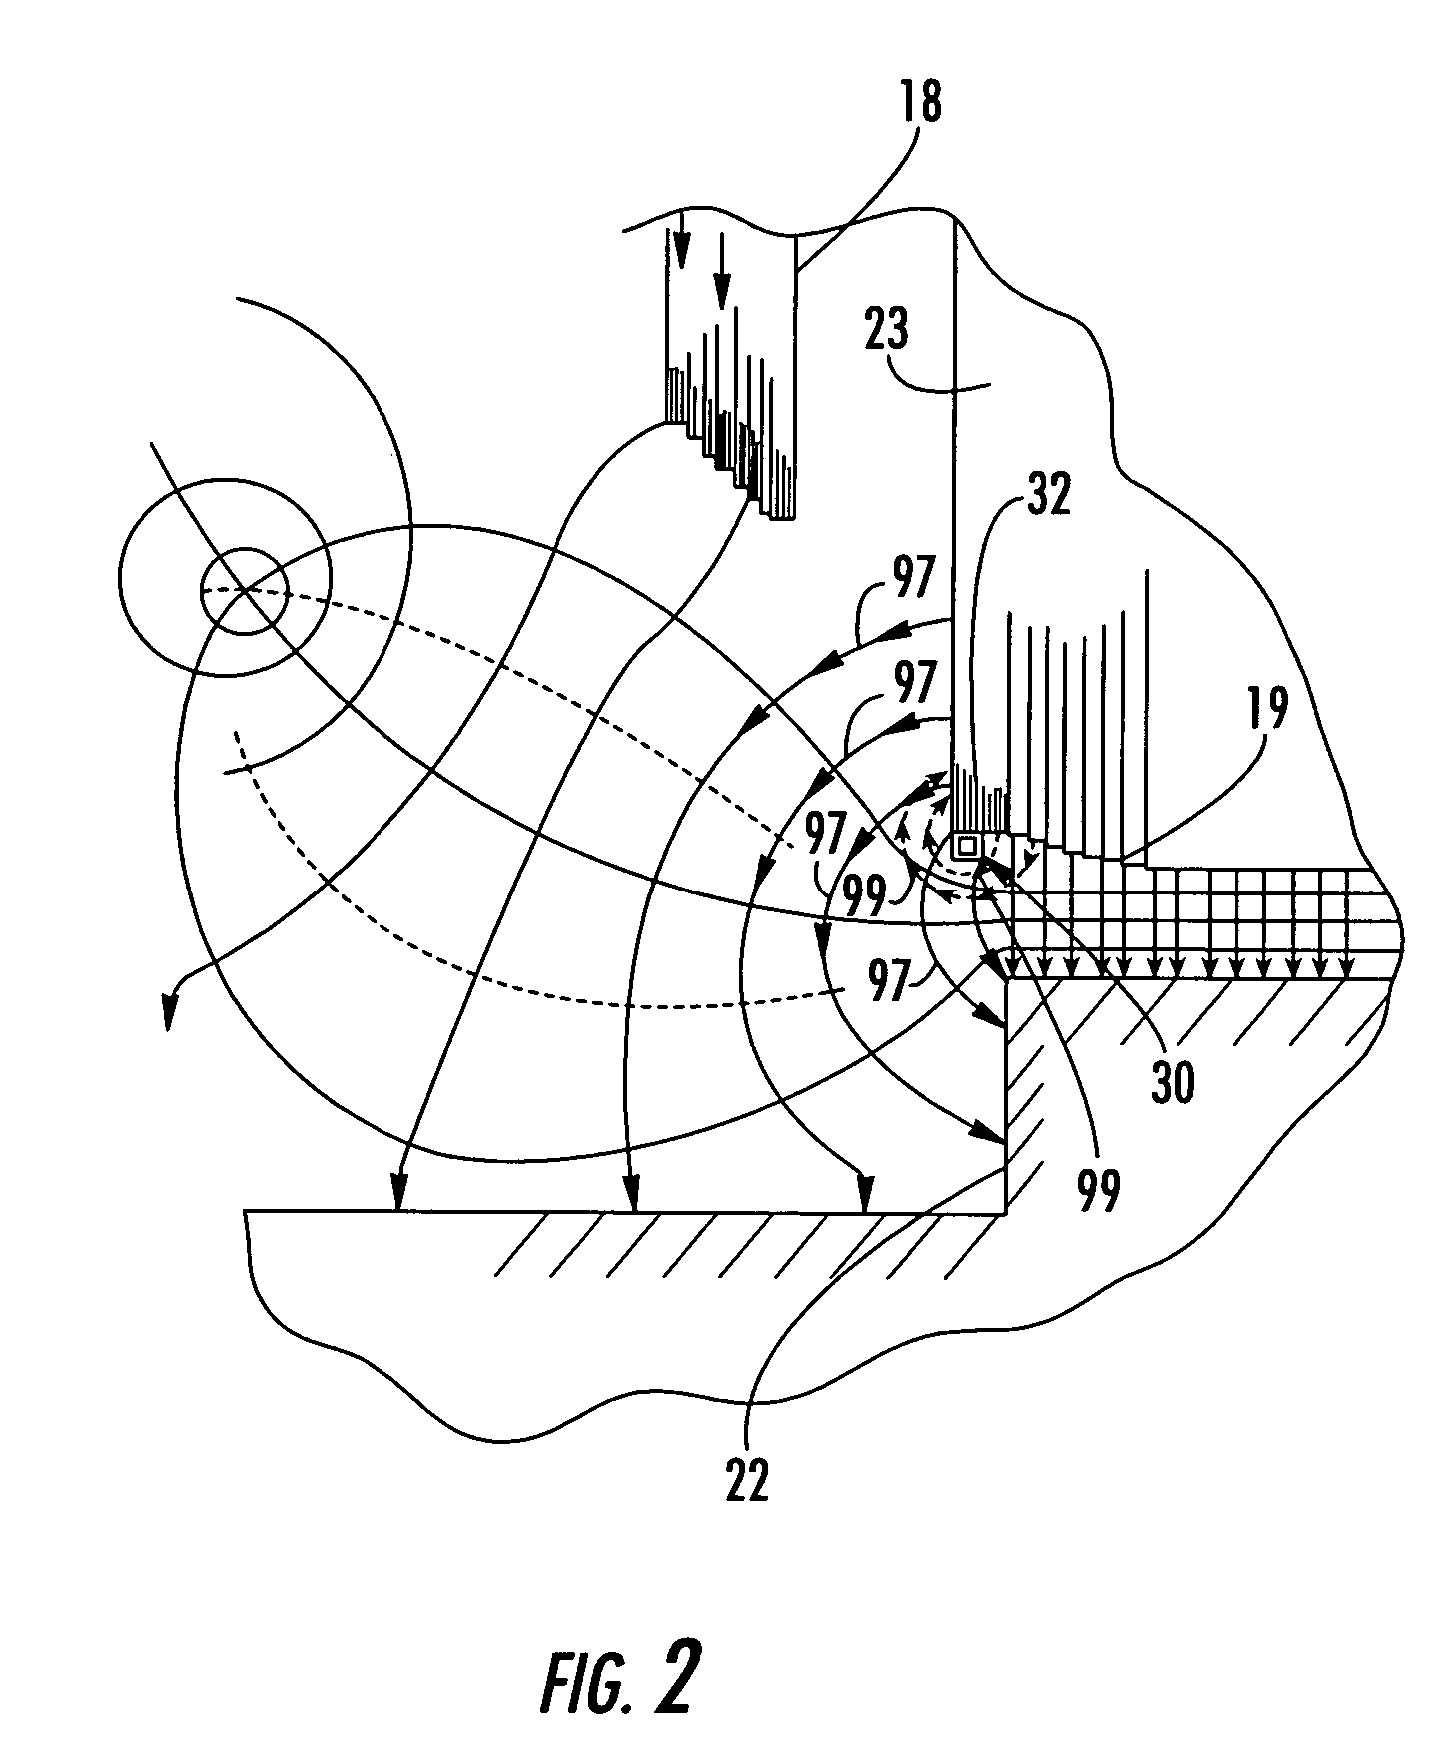 Counteracting magnetic field generator for undesired axial magnetic field component of a power generator stator and associated methods